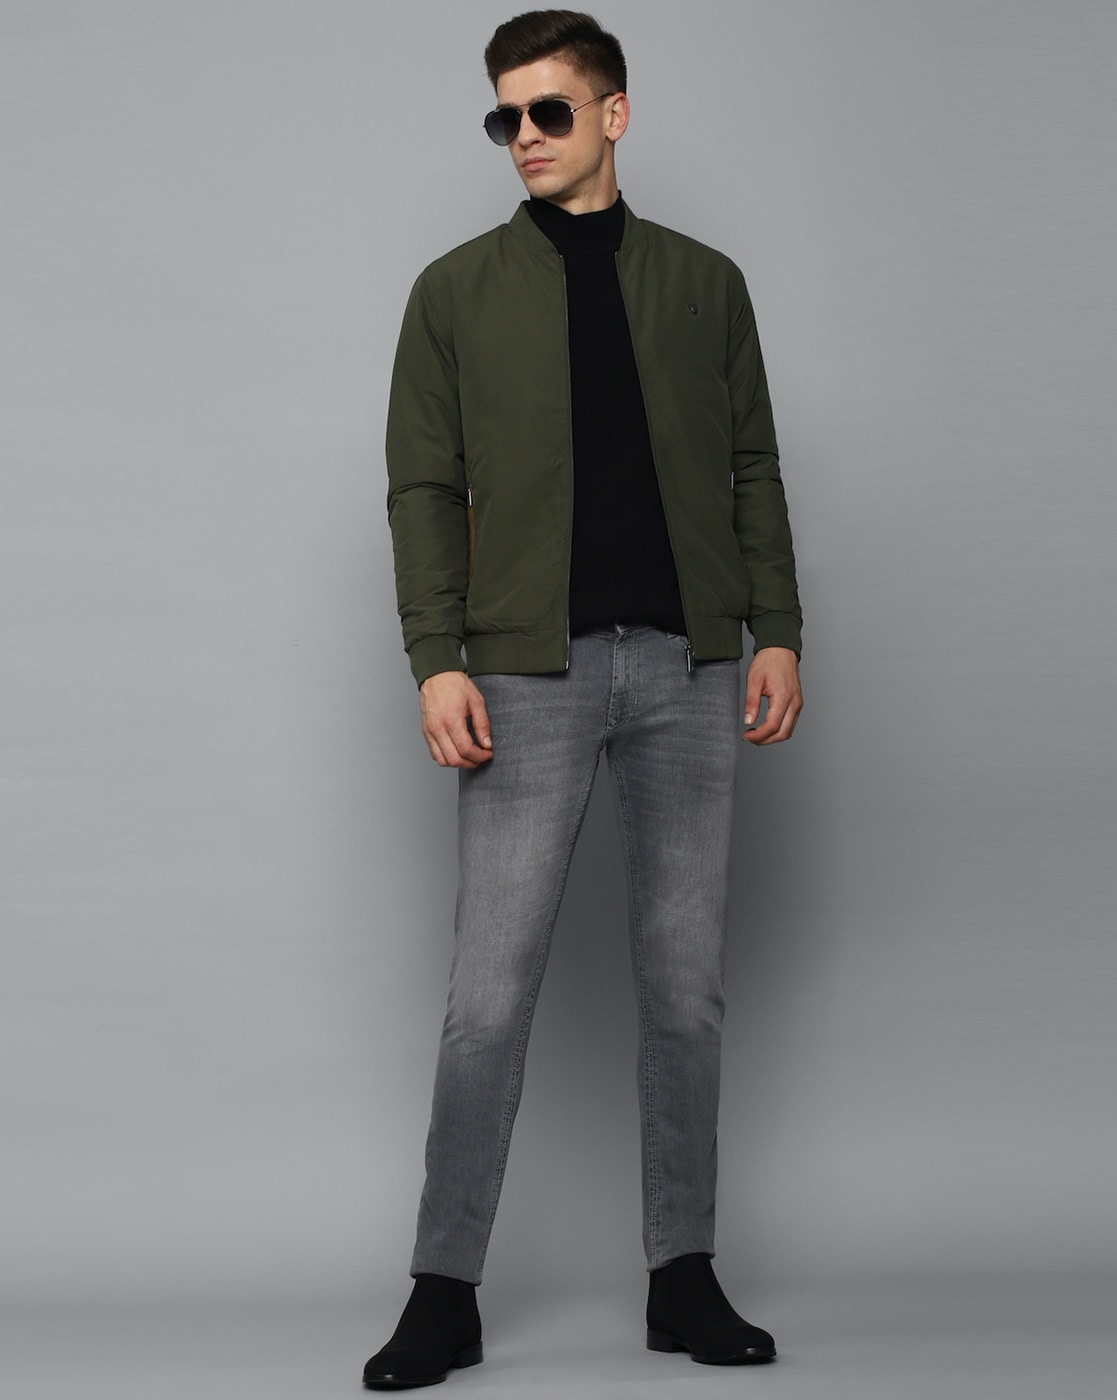 Olive Bomber Jacket with Black Jeans Relaxed Spring Outfits For Men (4  ideas & outfits) | Lookastic